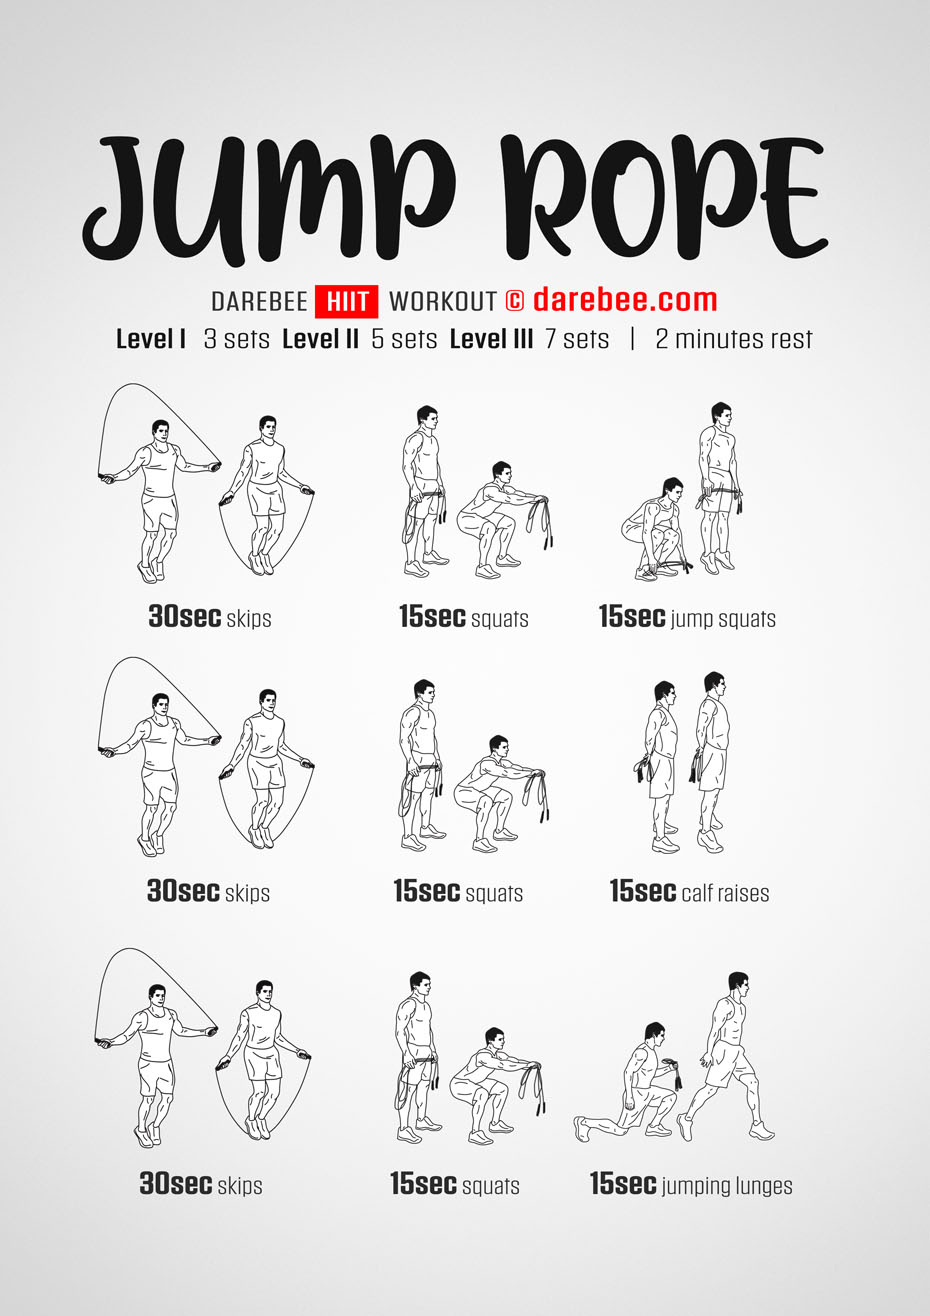 How to Jump Rope (Workout for Beginners)